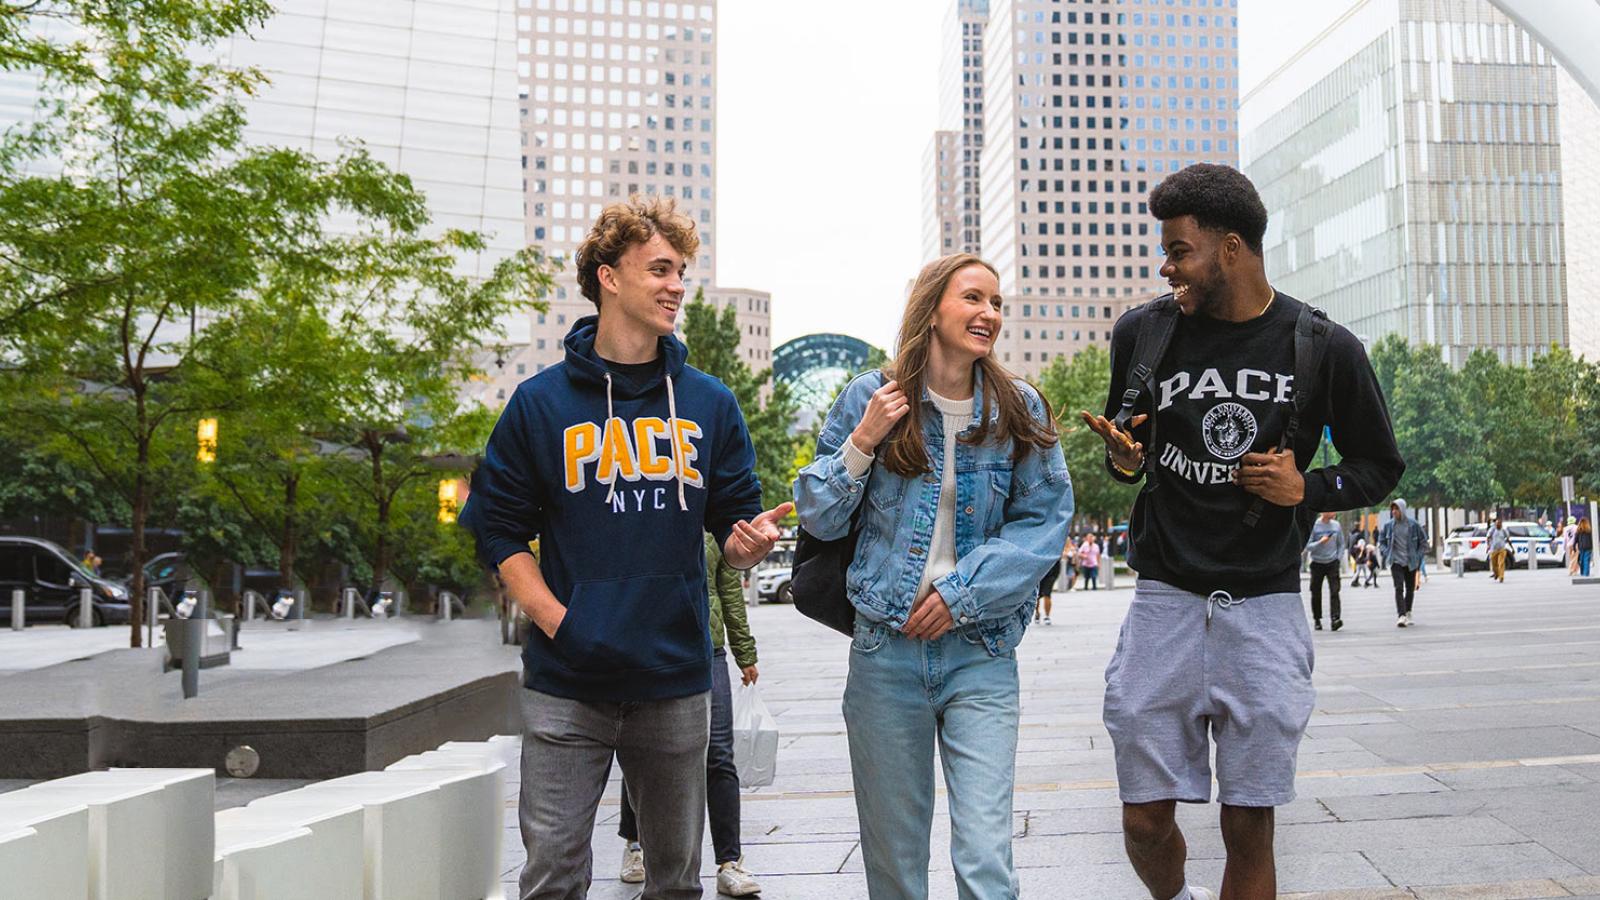 Pace University students walking down the street in New York City